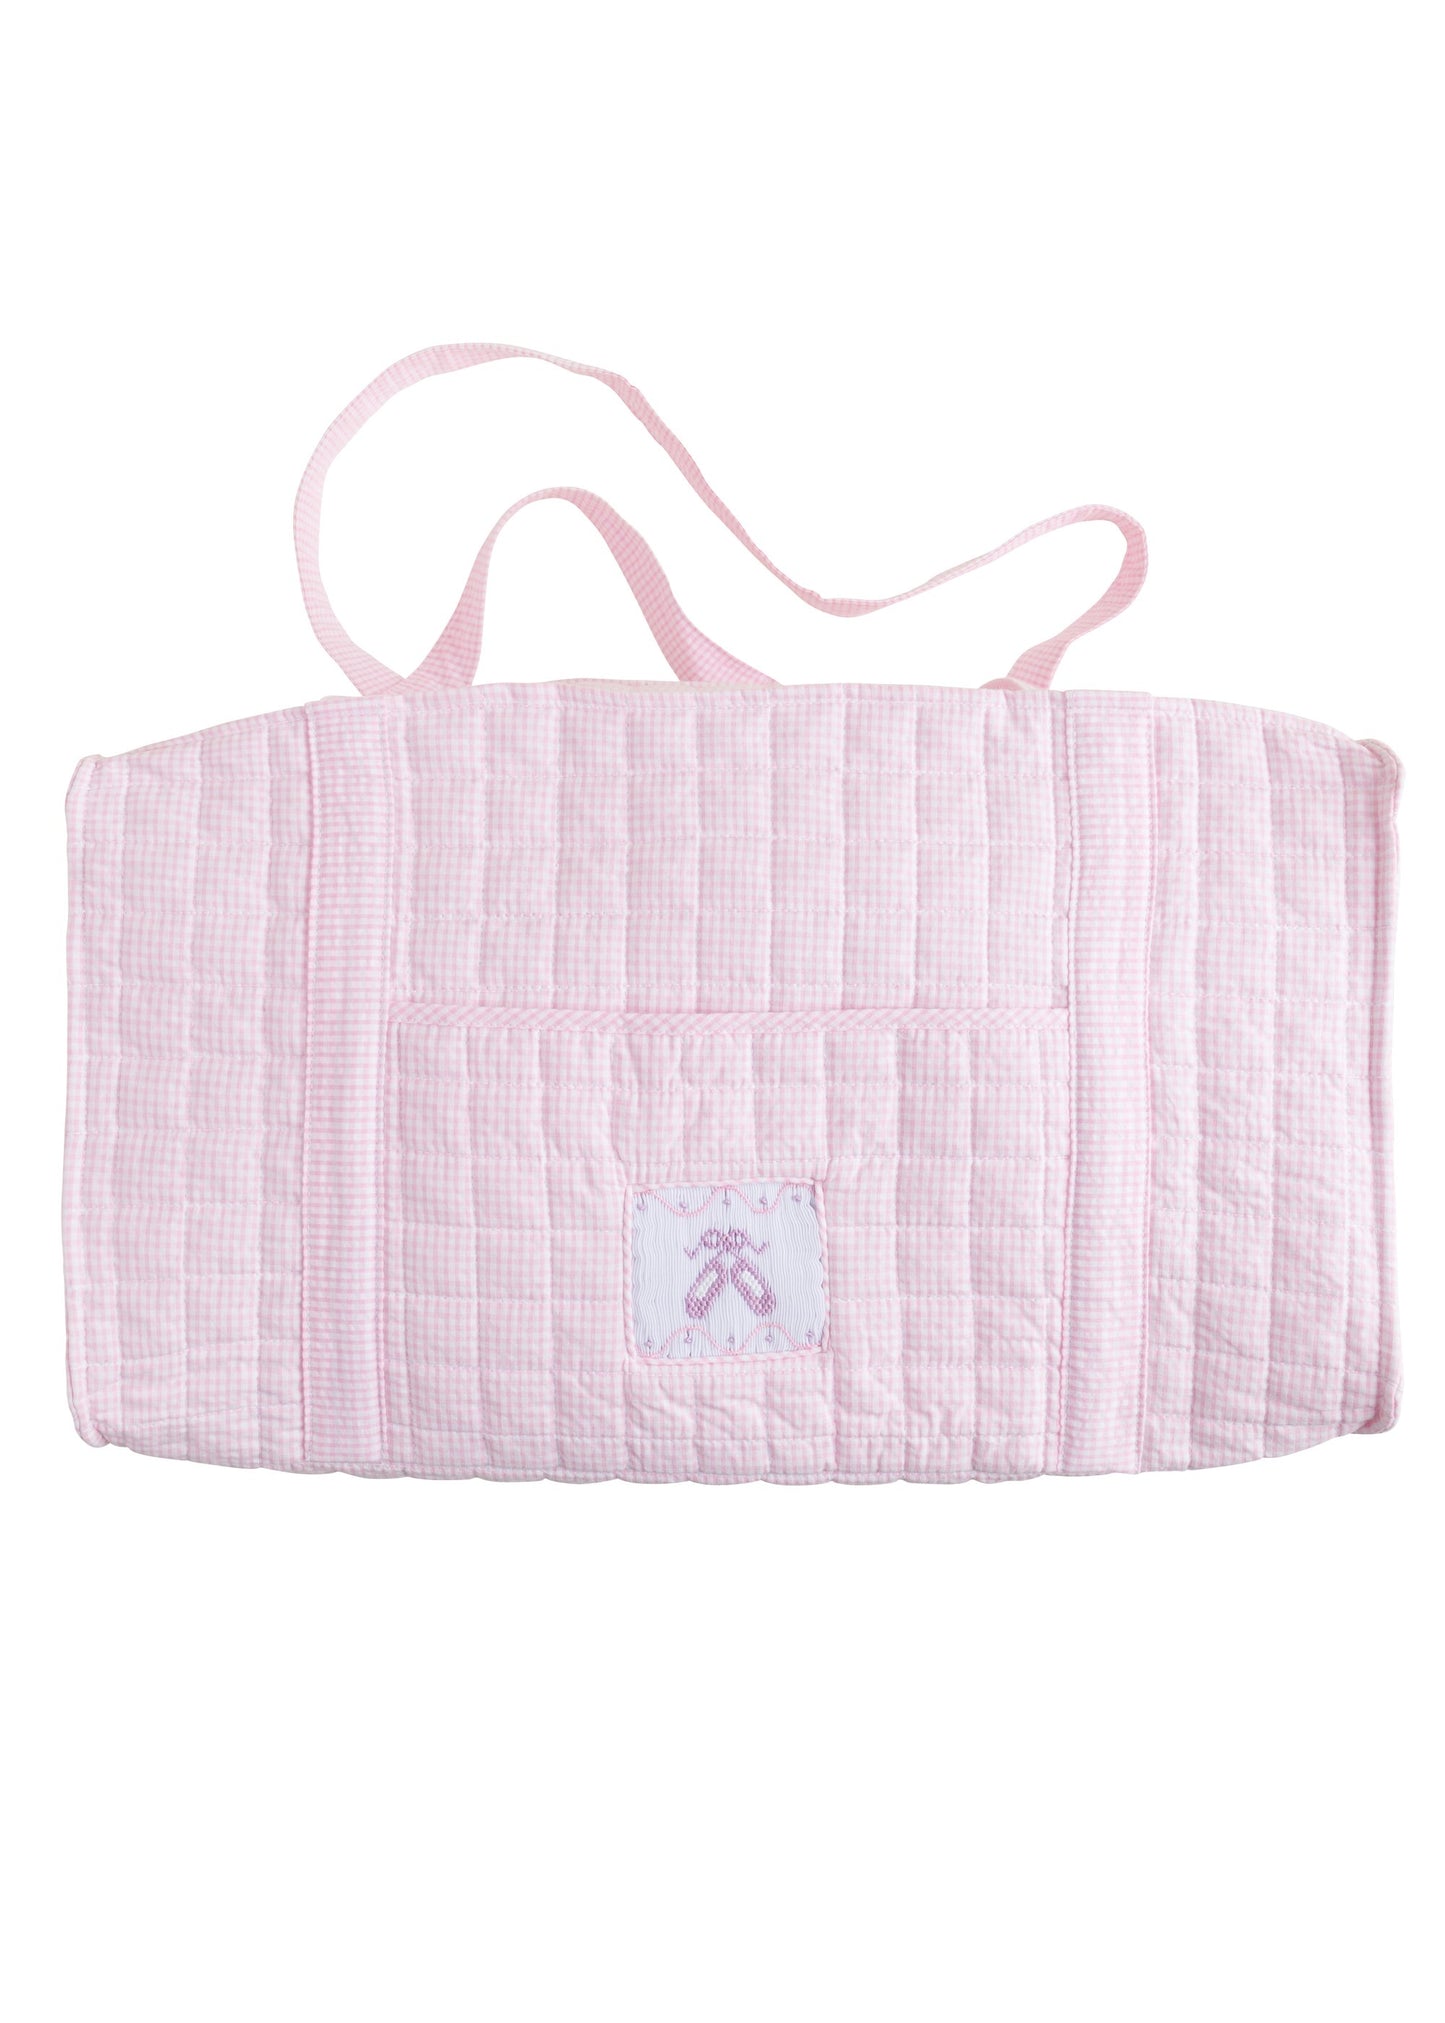 Quilted Luggage Duffle Bag - Ballet Slipper